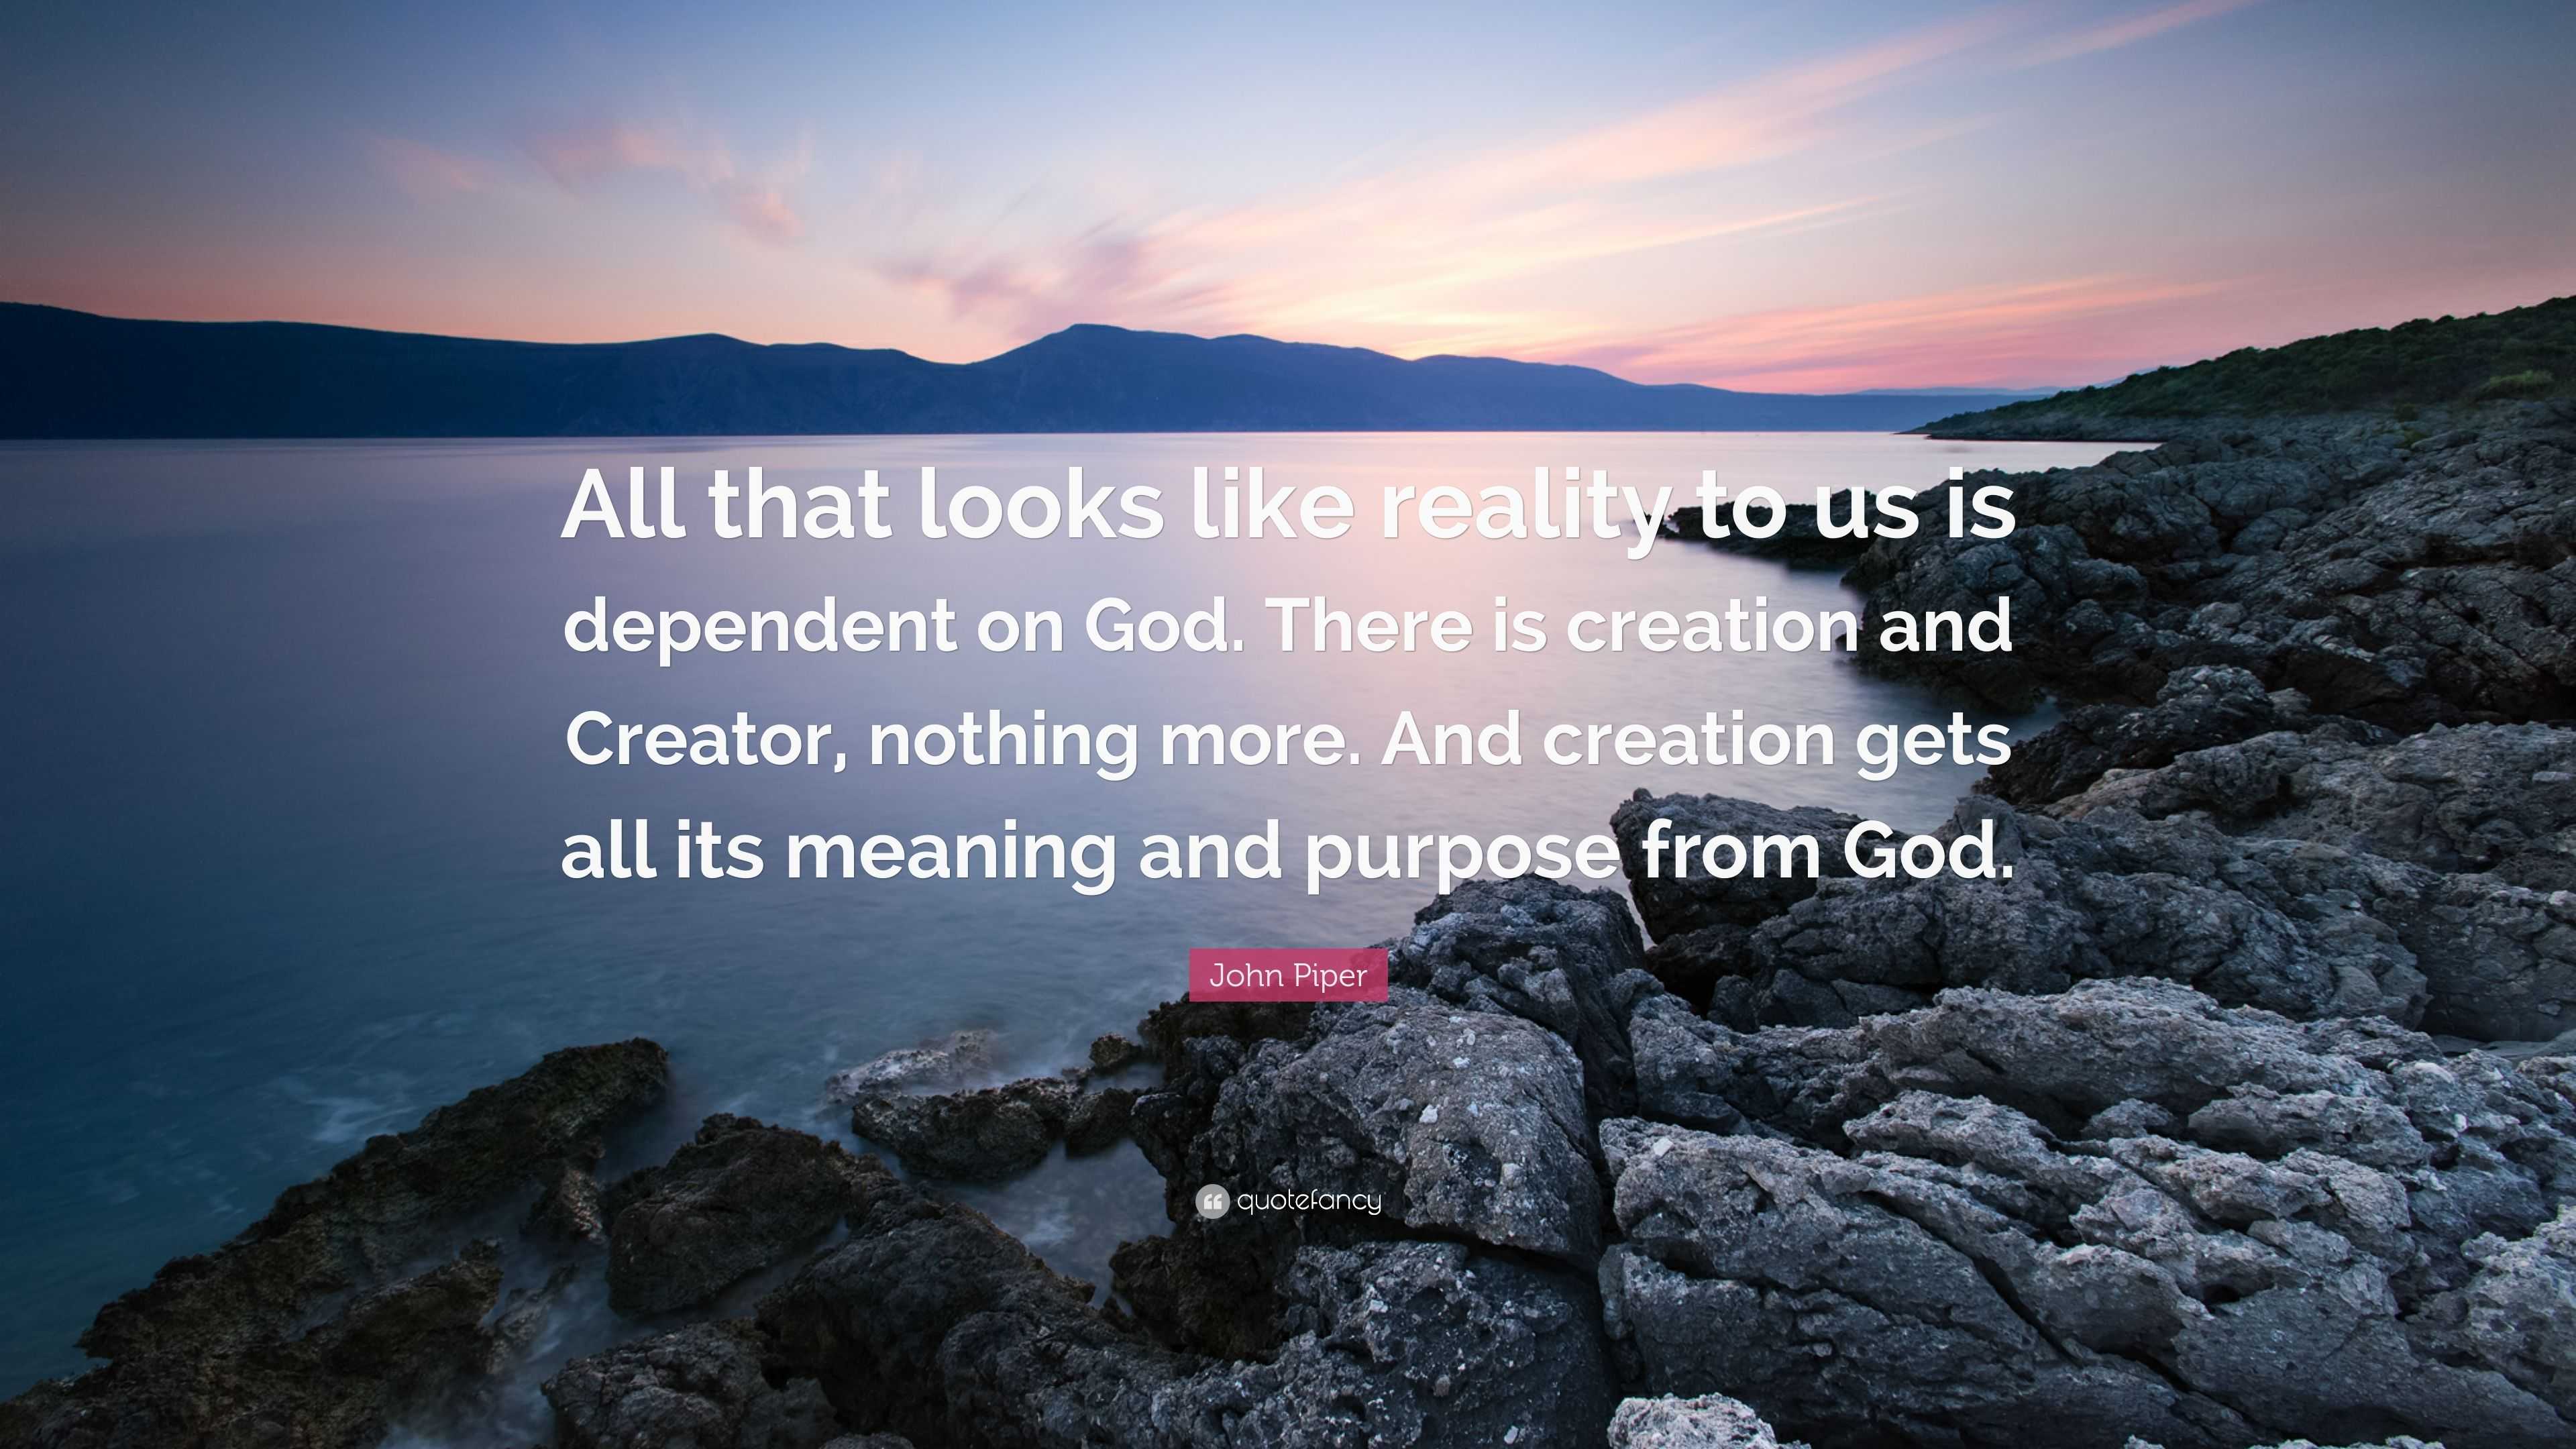 John Piper Quote: "All that looks like reality to us is ...